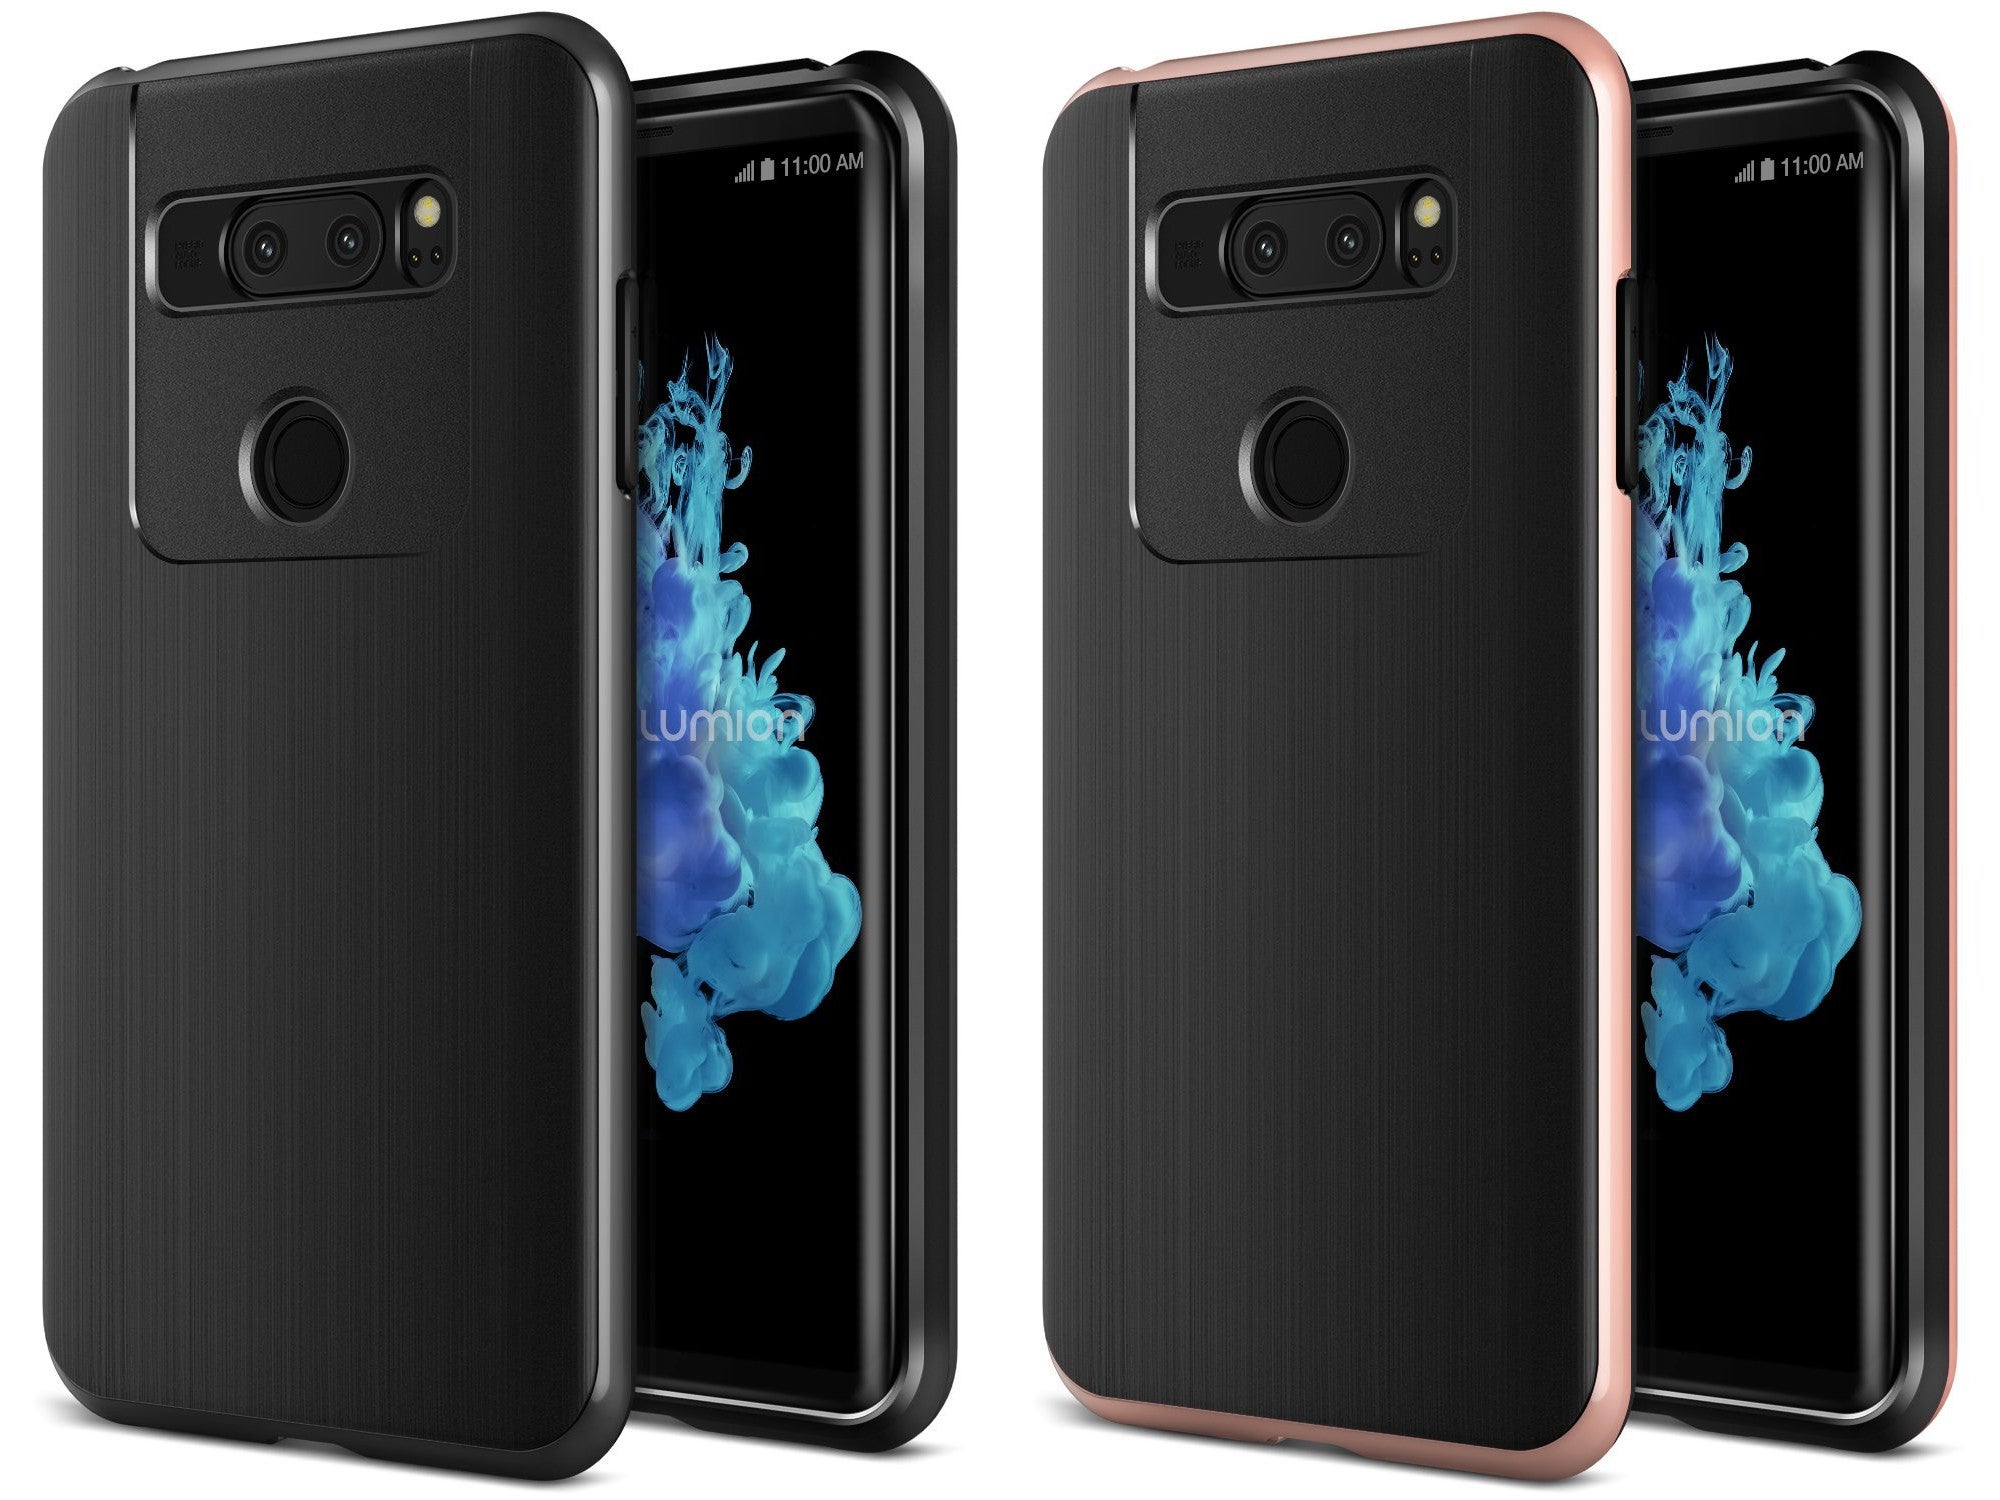 Lumion Gradien - The best LG V30 cases and covers